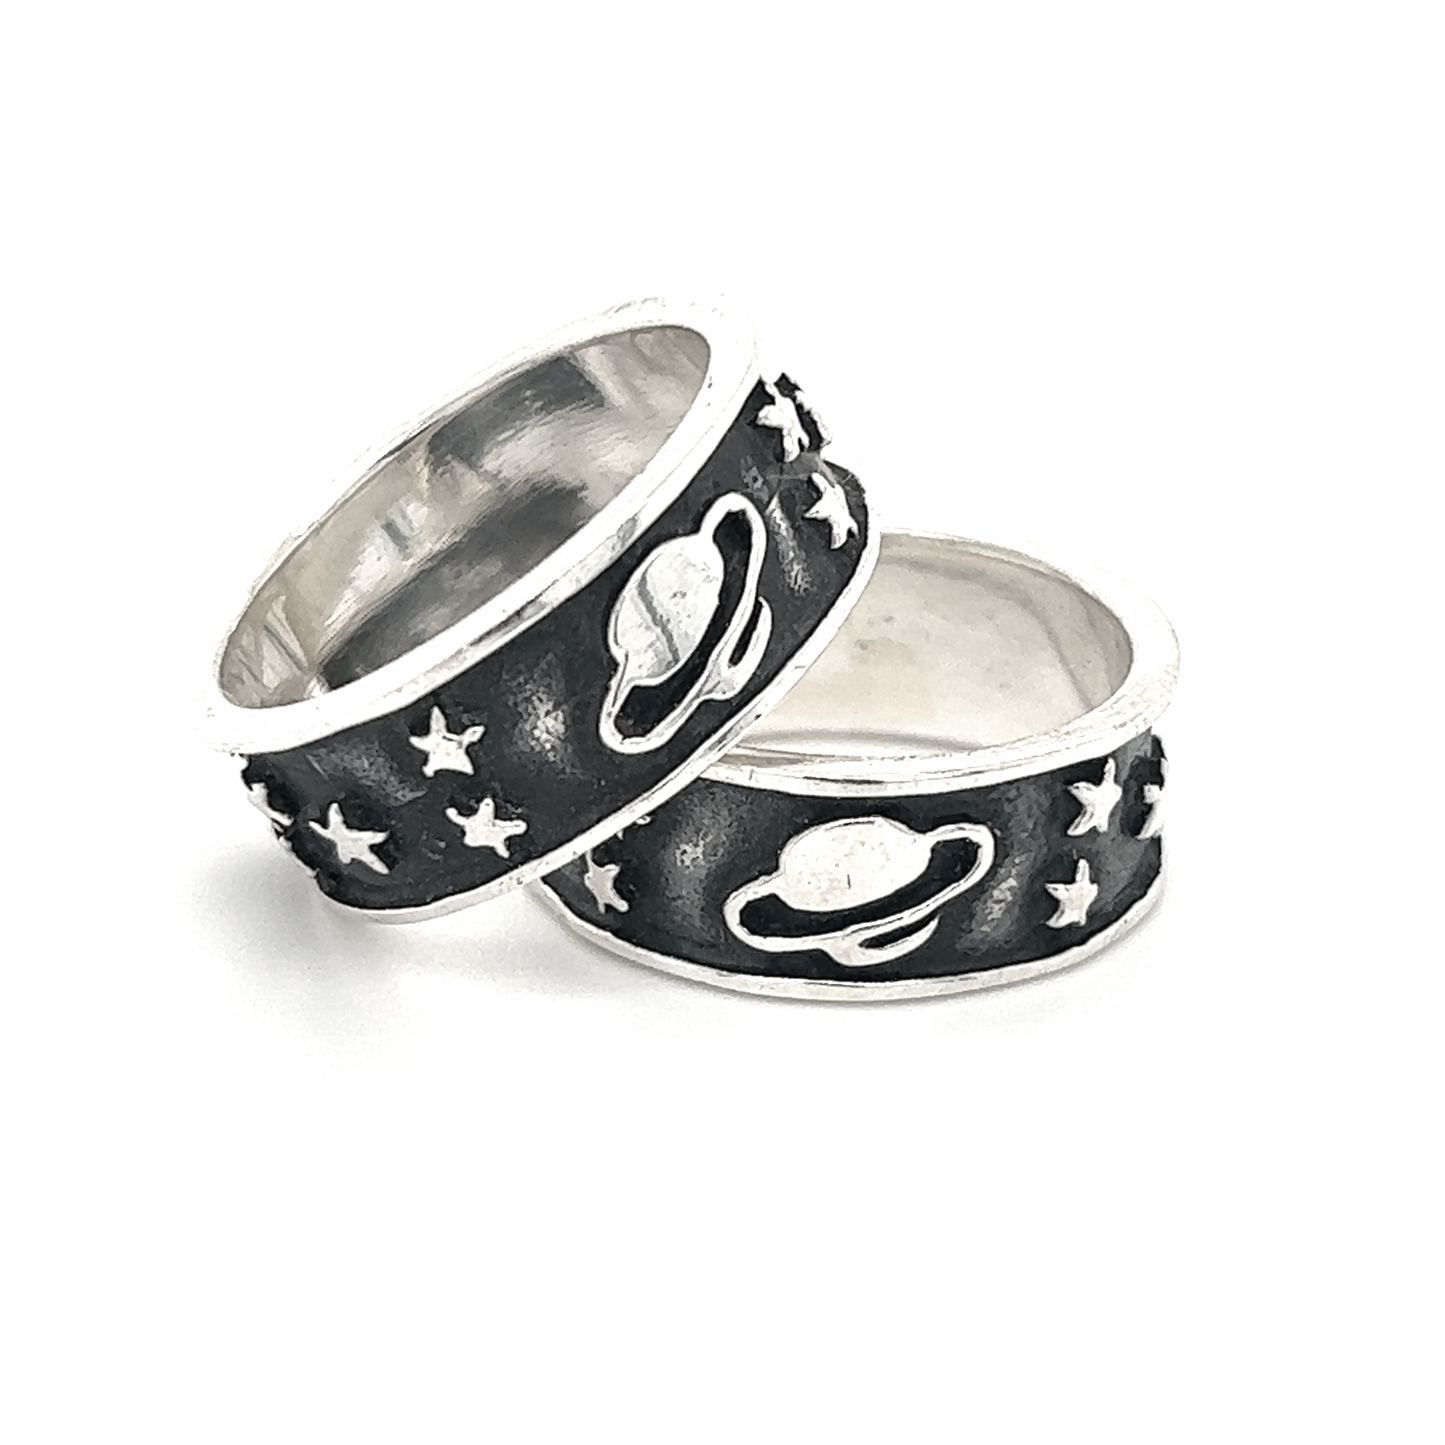 Two Super Silver Heavy Space Rings with stars and planets from outer space on them.